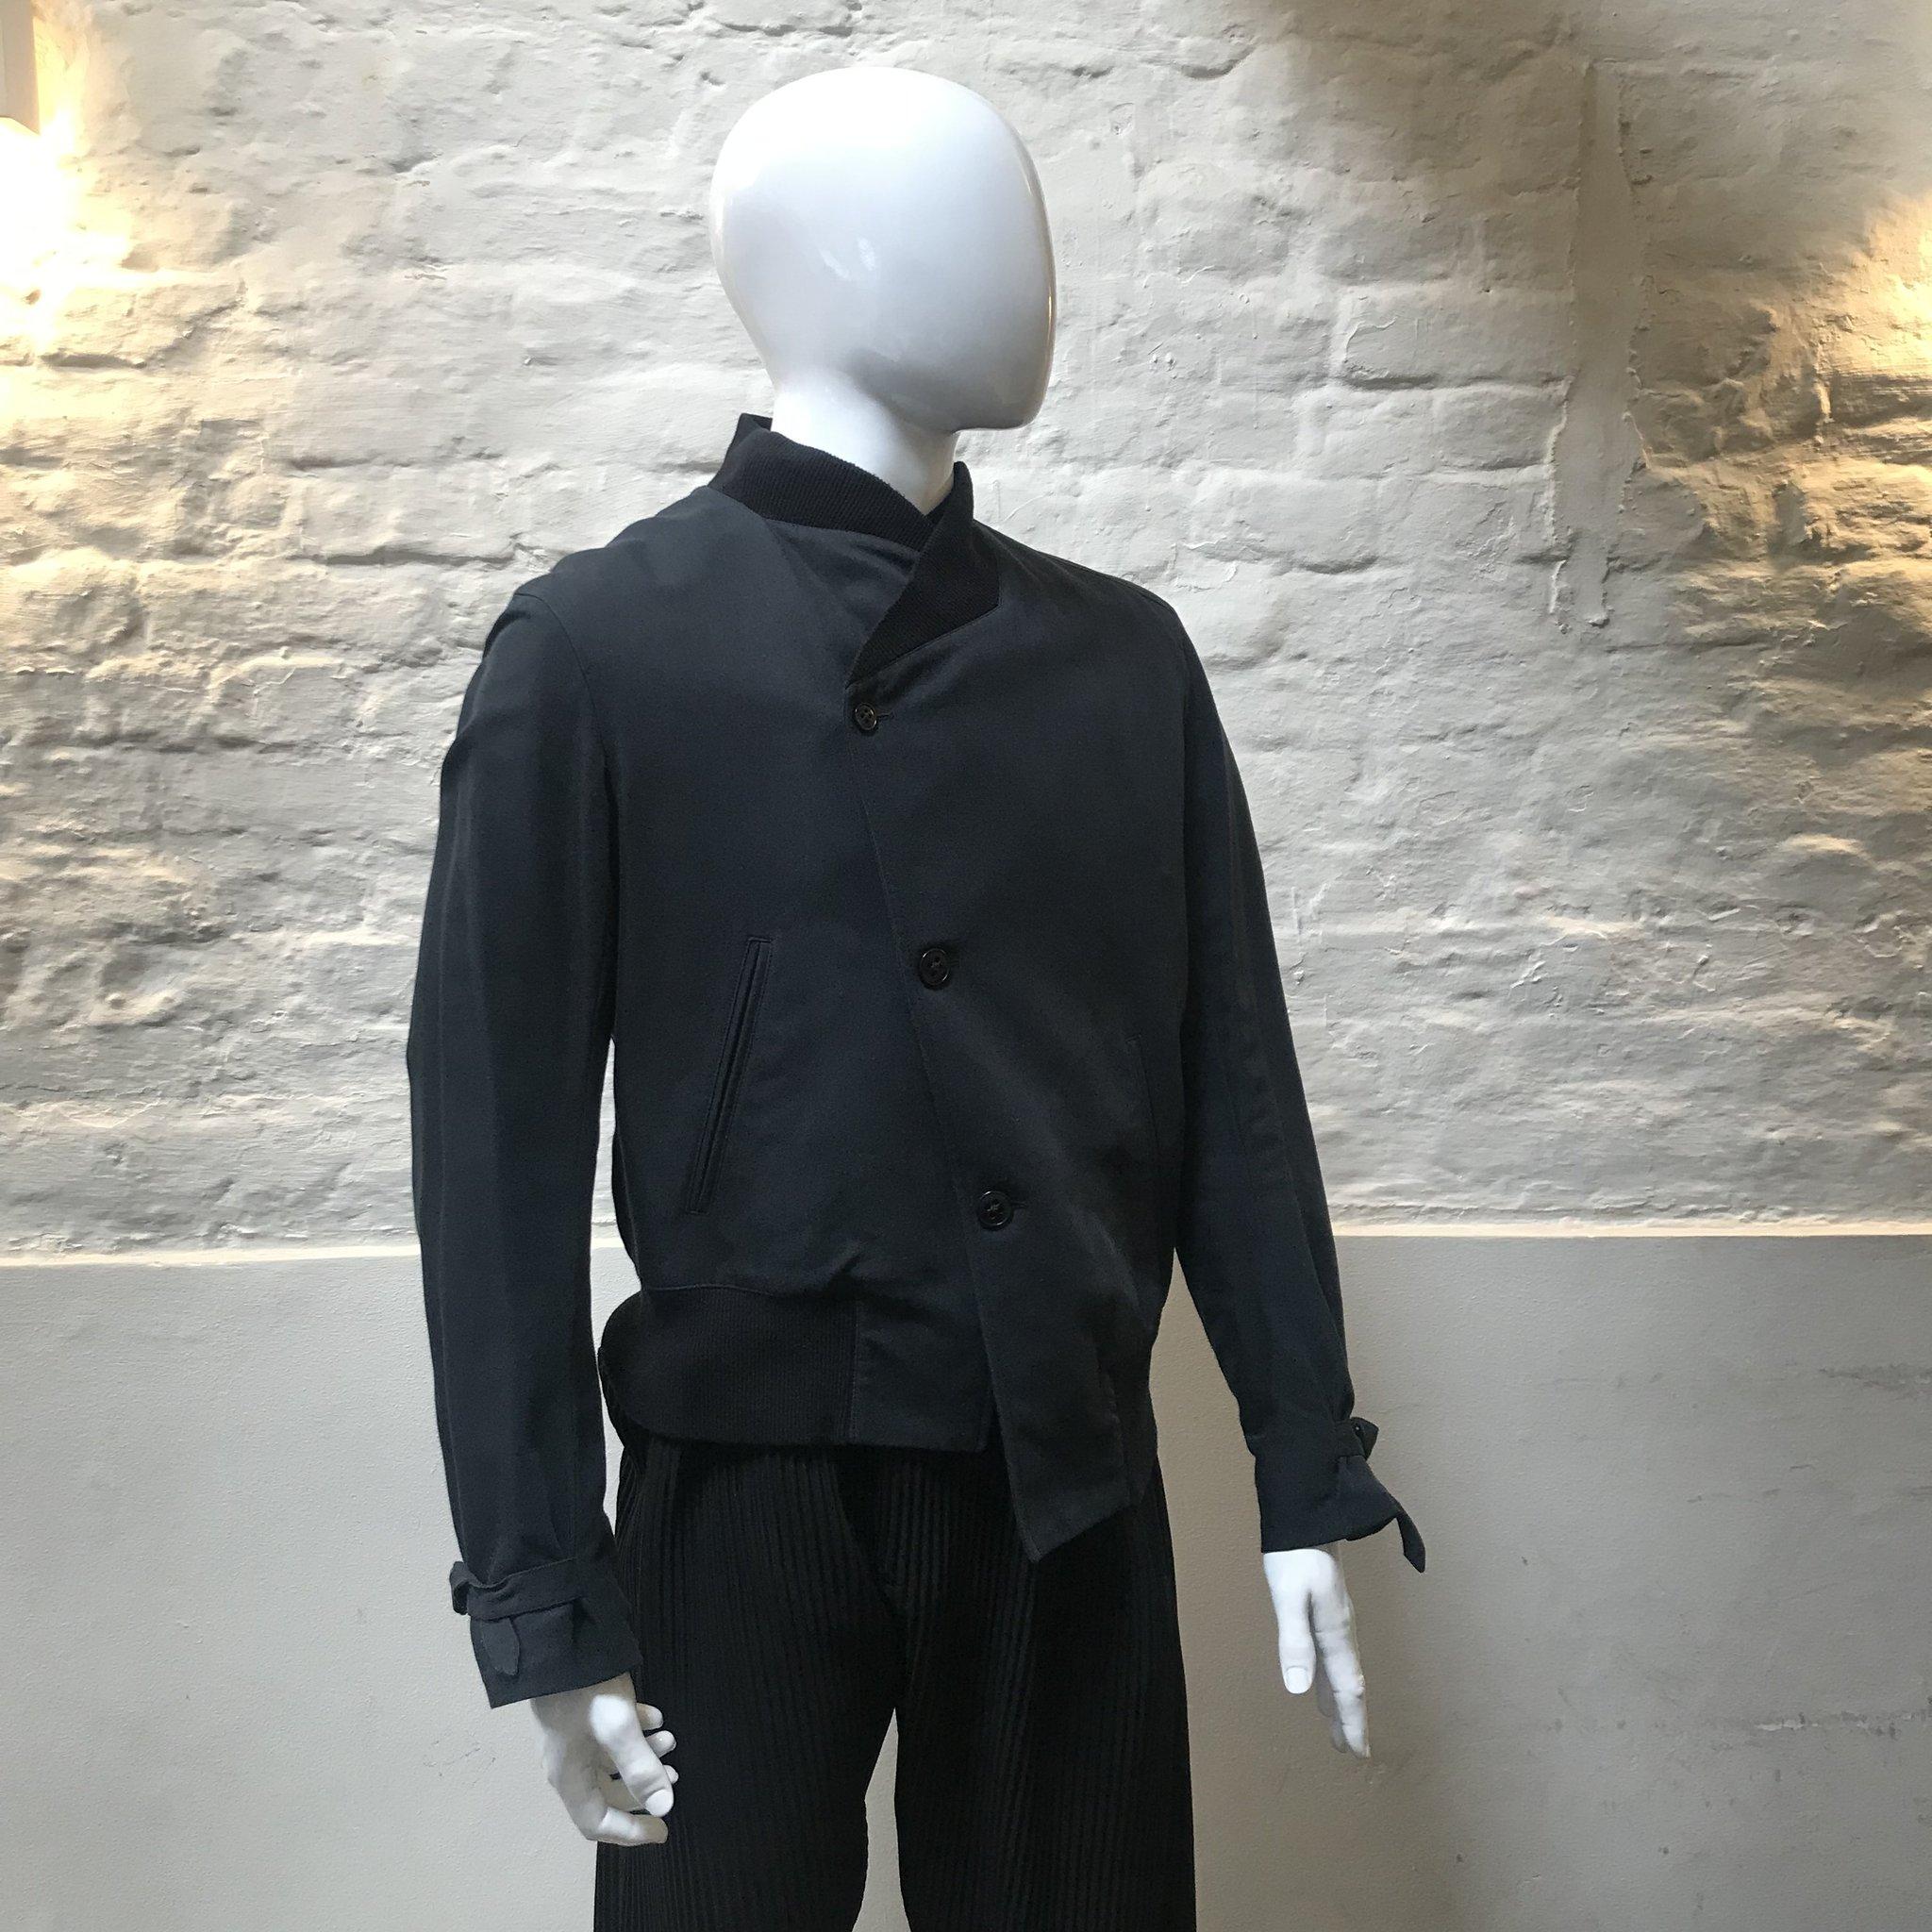 Ann Demeuleemster Asymmetrical Bomber Jacket made in Belgium from cotton. 

Ann Demeulemeester is a fashion house established in 1985 and based in Antwerp, Belgium. Renowned for a poetic balance of shadow and light, the collections for women and men